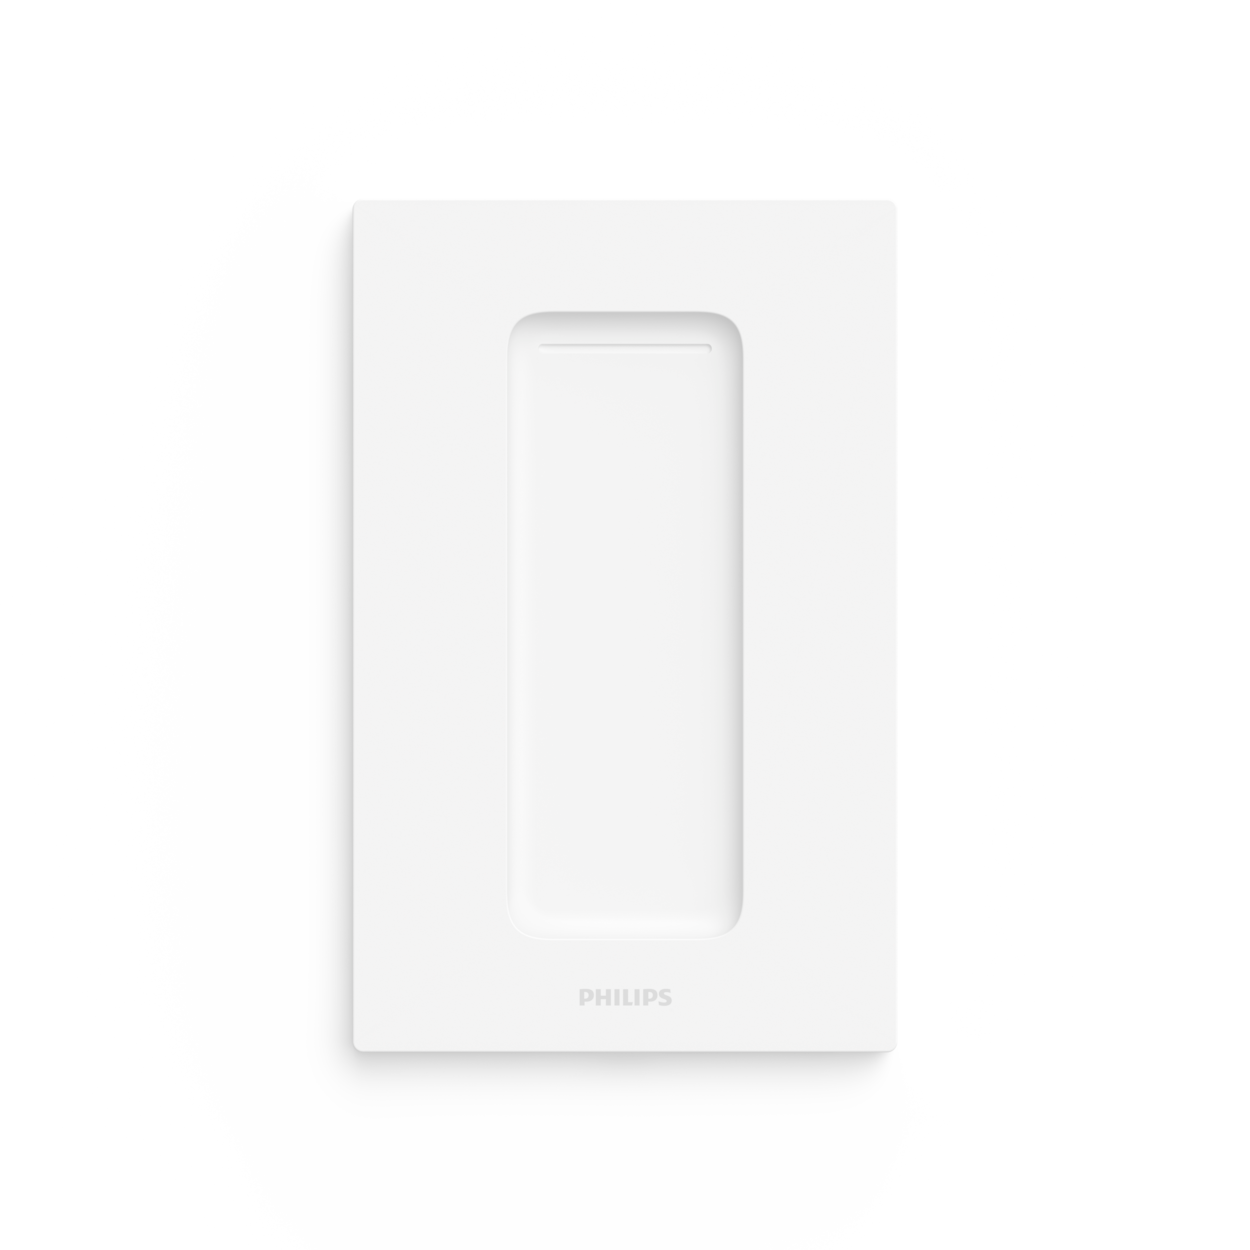 Philips Hue Dimmer Switch wall plate